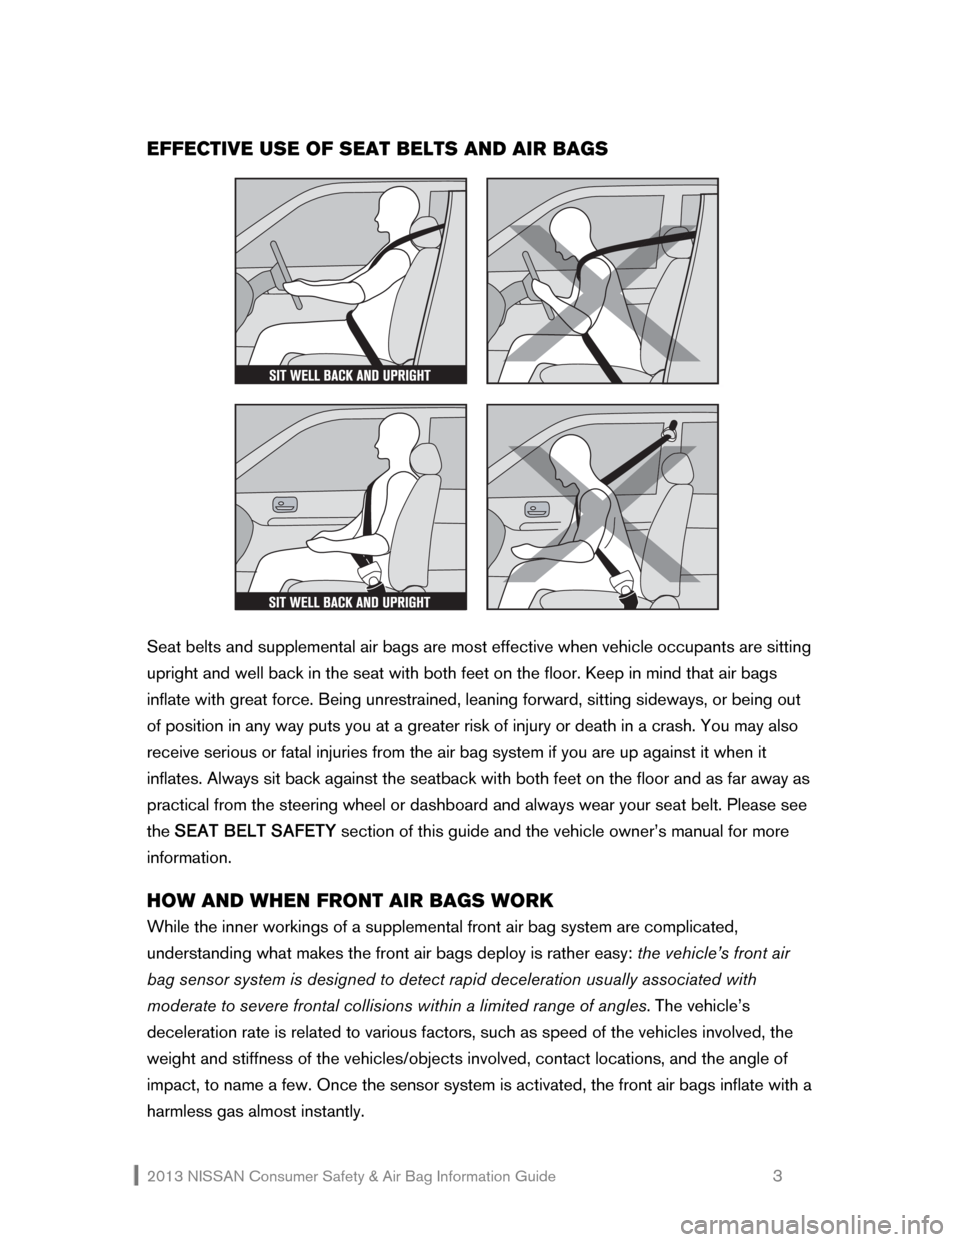 NISSAN ARMADA 2013 1.G Consumer Safety Air Bag Information Guide 2013 NISSAN Consumer Safety & Air Bag Information Guide                                                   3 
EFFECTIVE USE OF SEAT BELTS AND AIR BAGS 
 
 
 
Seat belts and supplemental air bags are mo